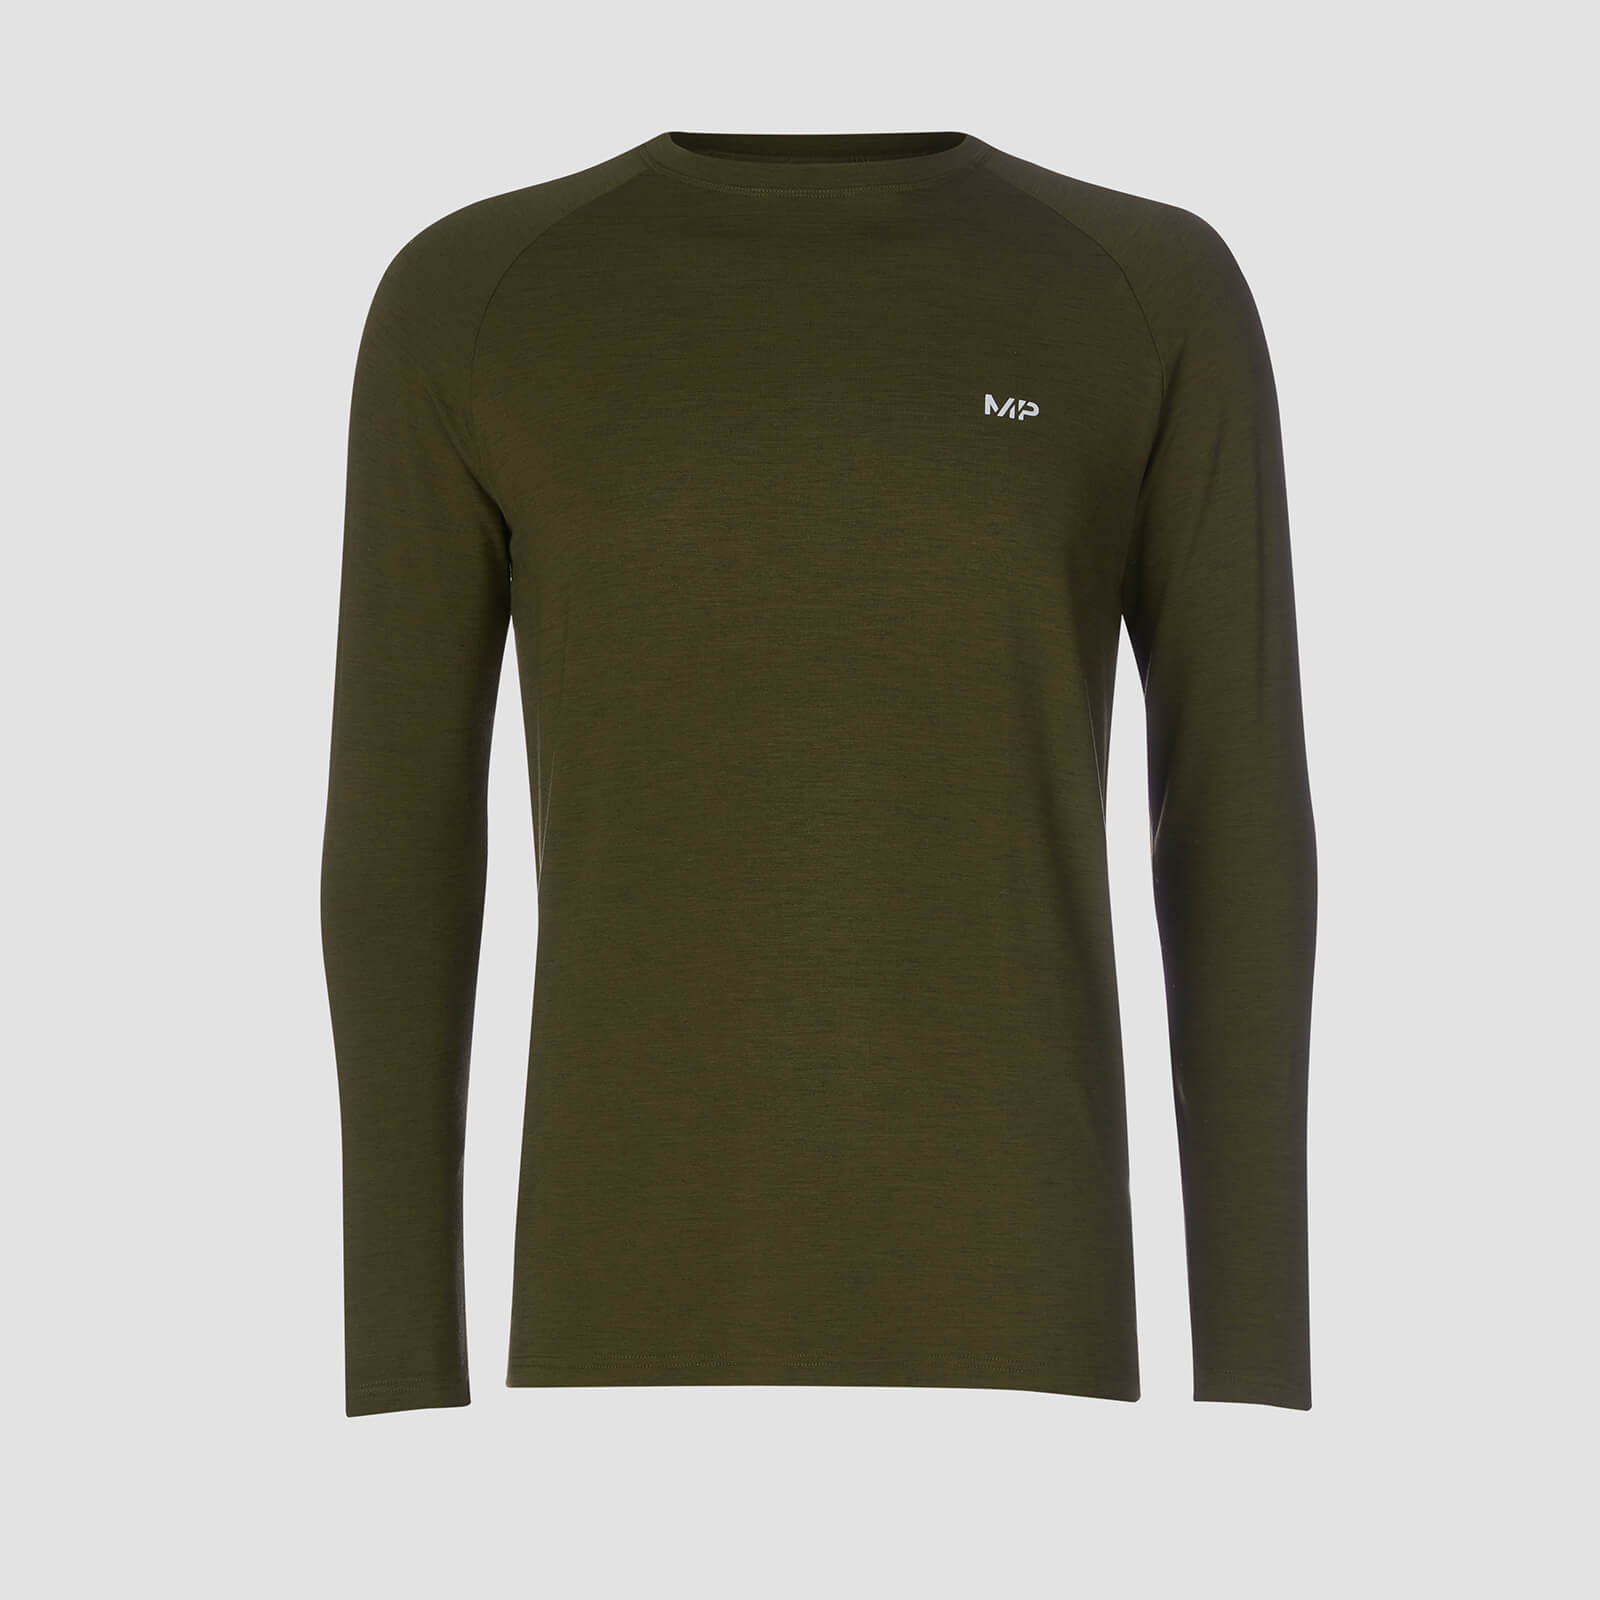 Myprotein MP Performance Long Sleeve T-Shirt - Army Green/Sort - M